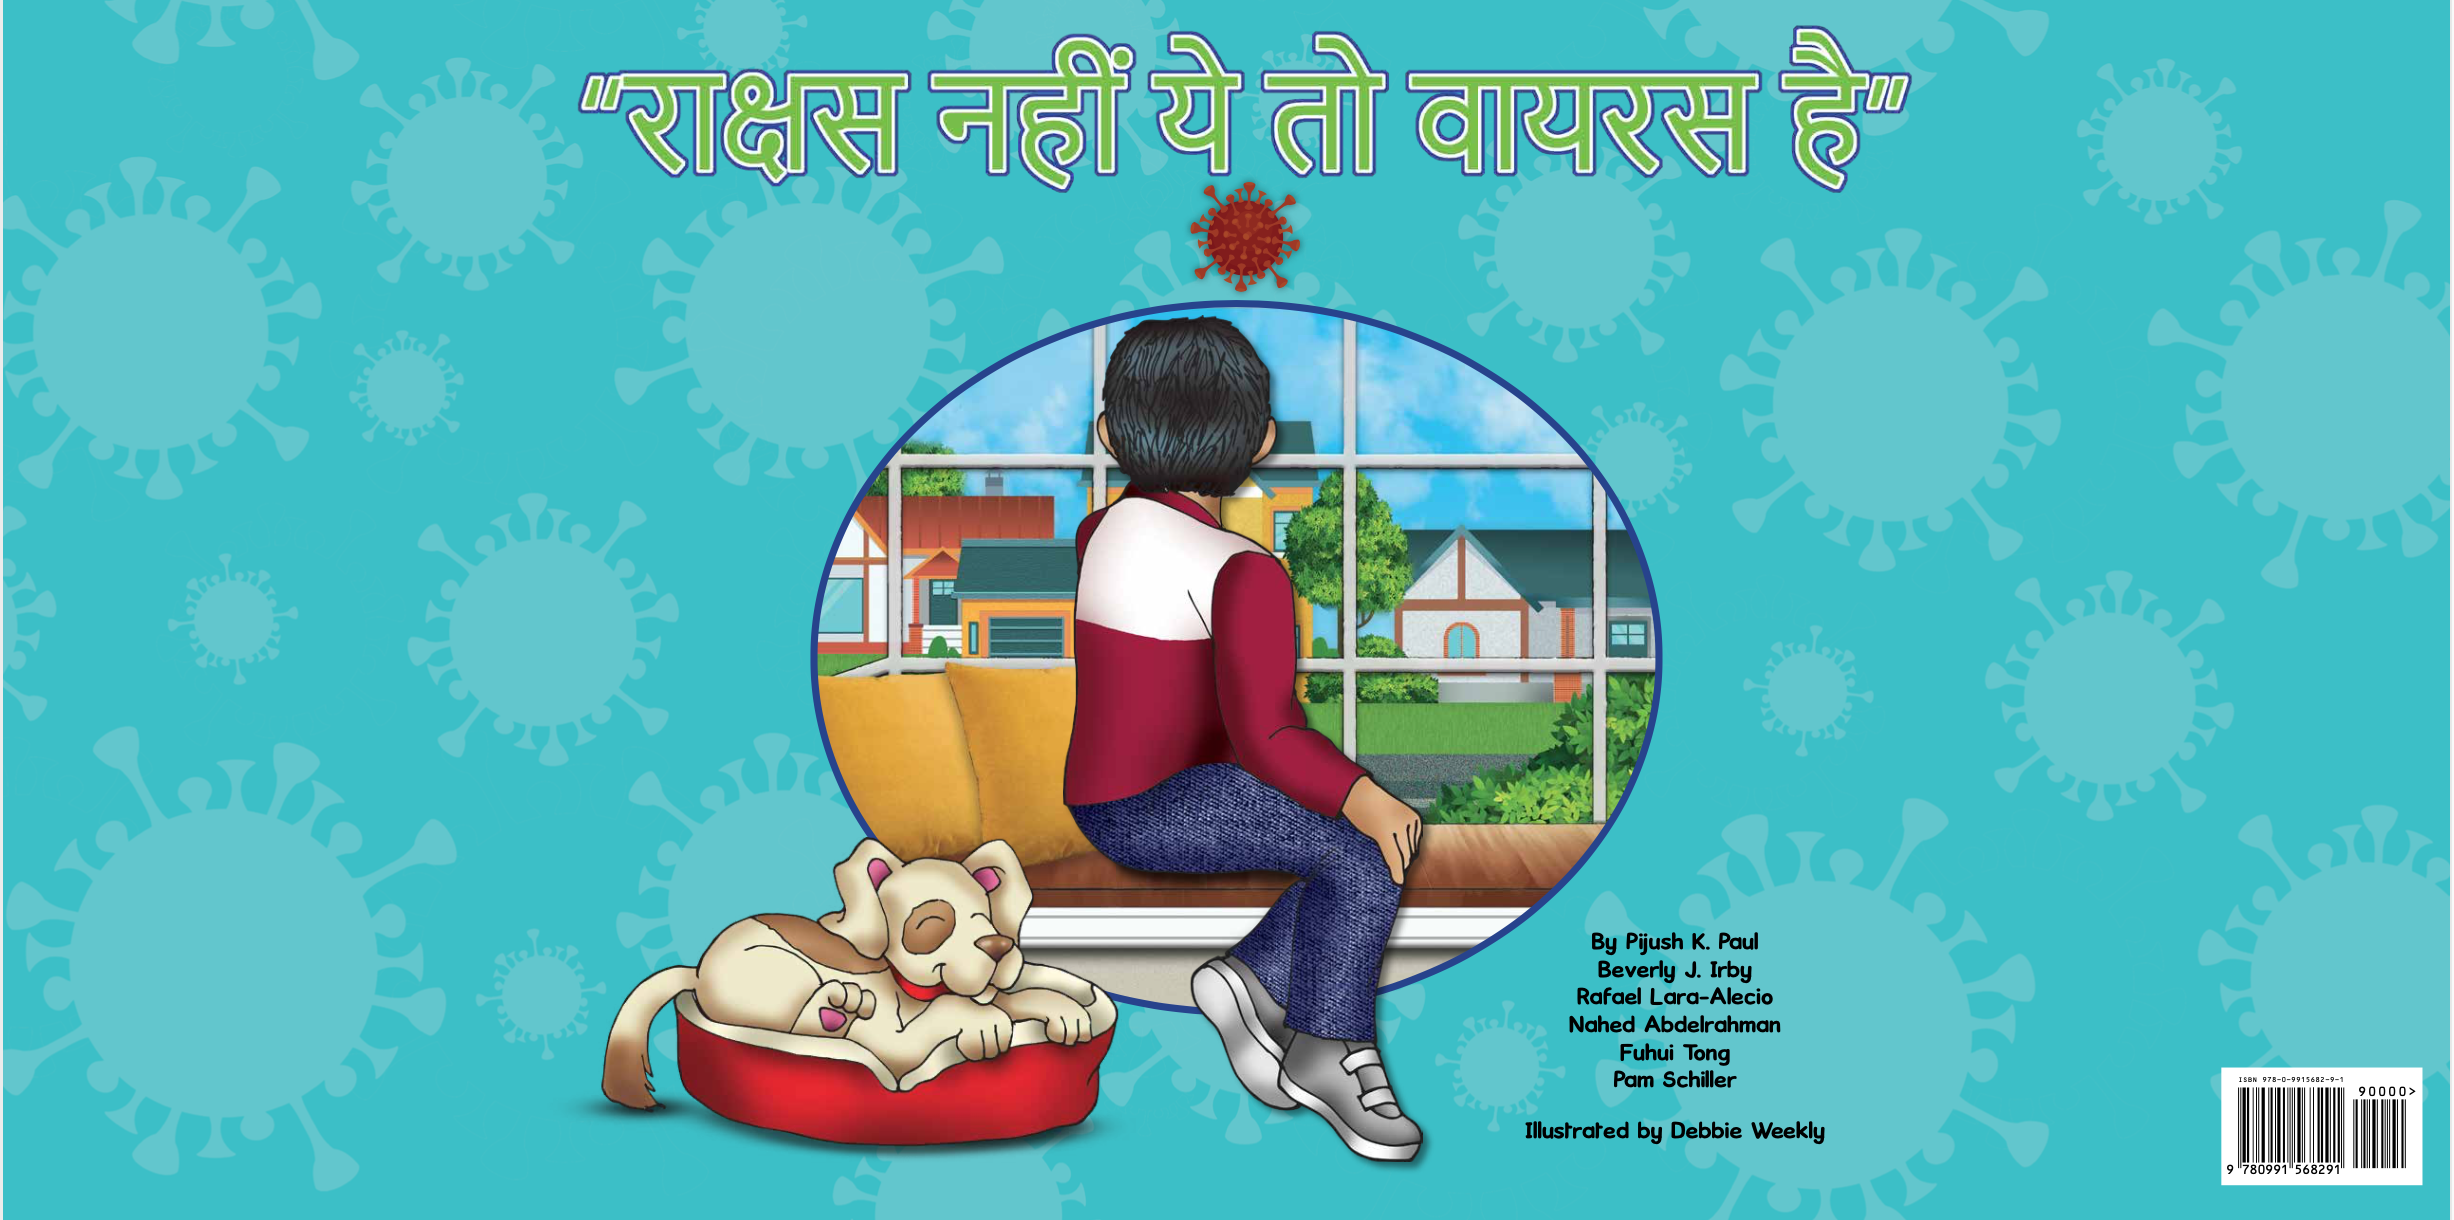 There Is No Monster Outside: It's A Virus! (Hindi Version)